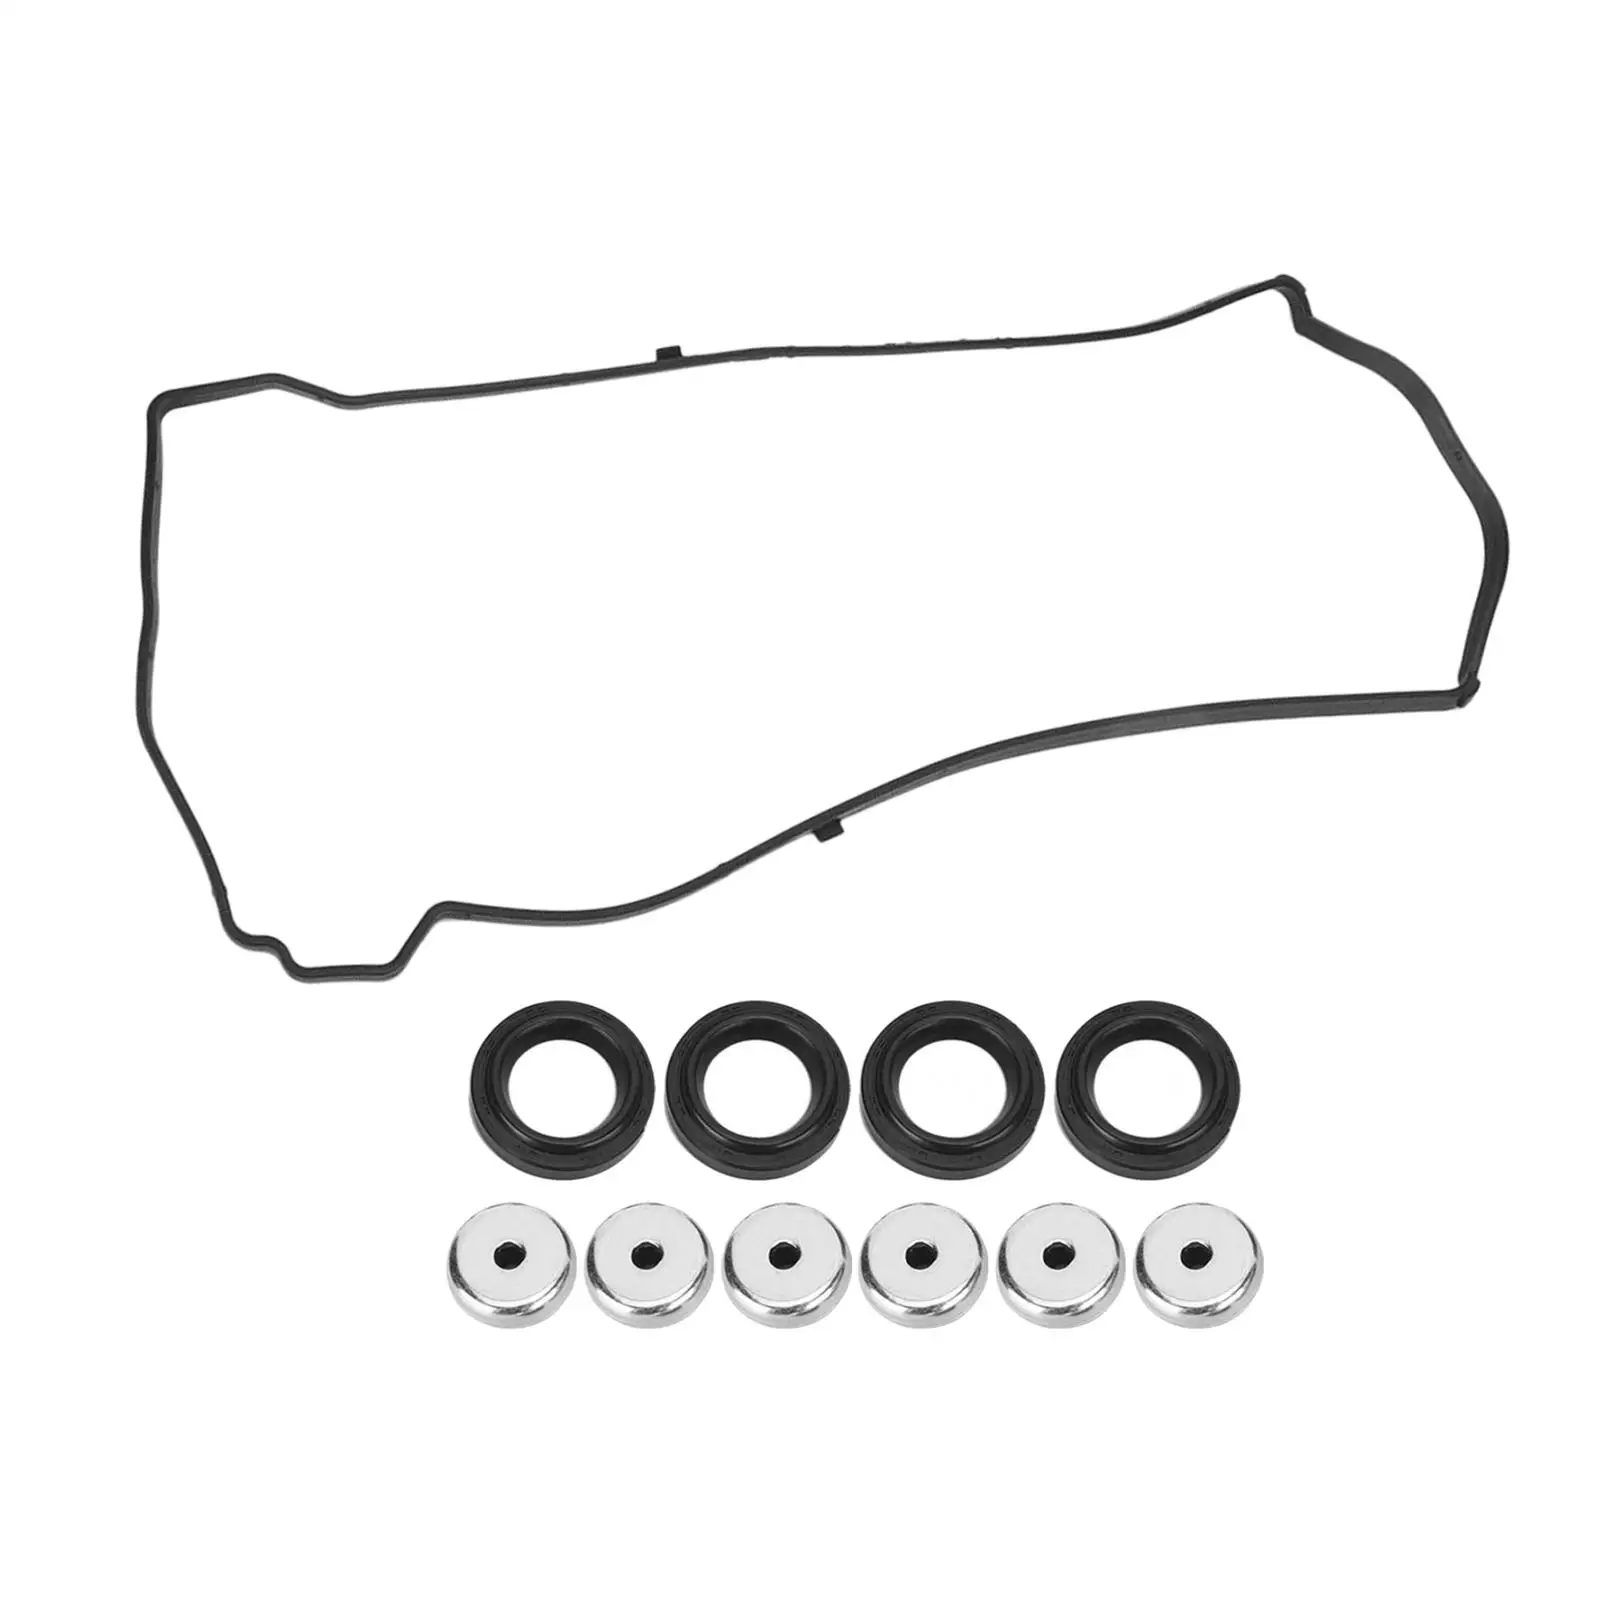 Valve Cover Gasket Seal 12030-pnc-000 Replacement Professional Assembly Mounting Hardware Replacement Parts for Honda Acura